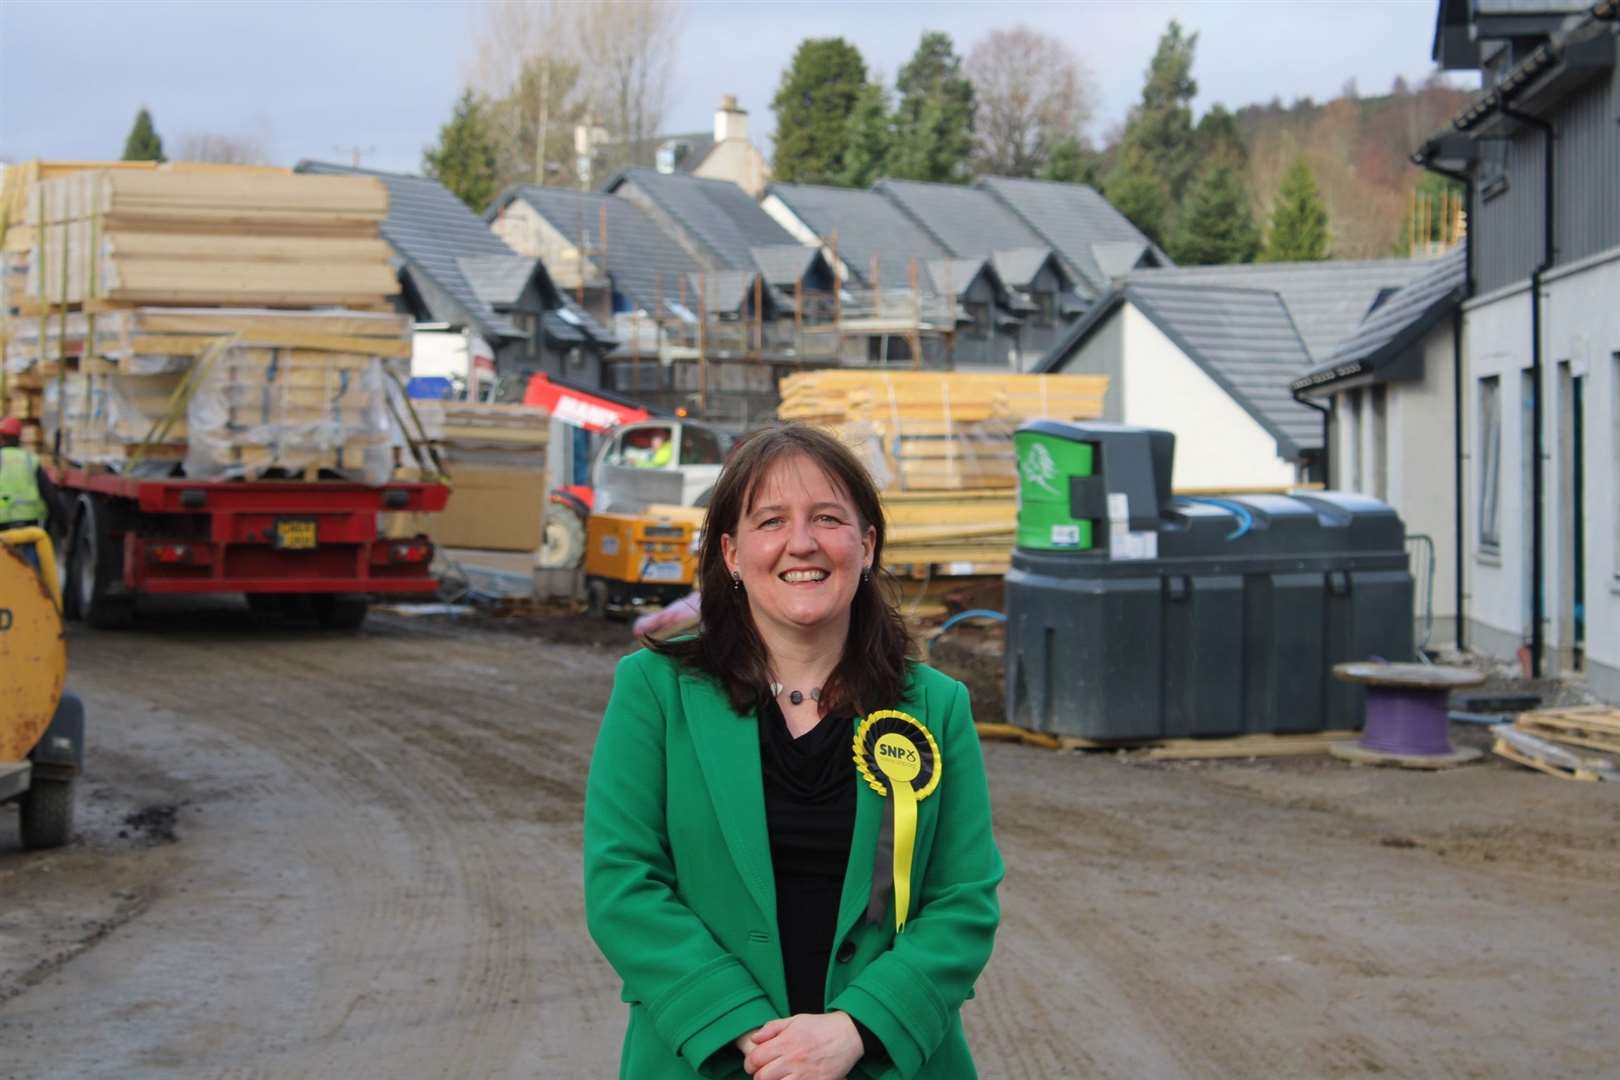 Maree Todd says that under the SNP's long-term housing strategy 100,000 new affordable homes will be delivered across Scotland by 2031/32.